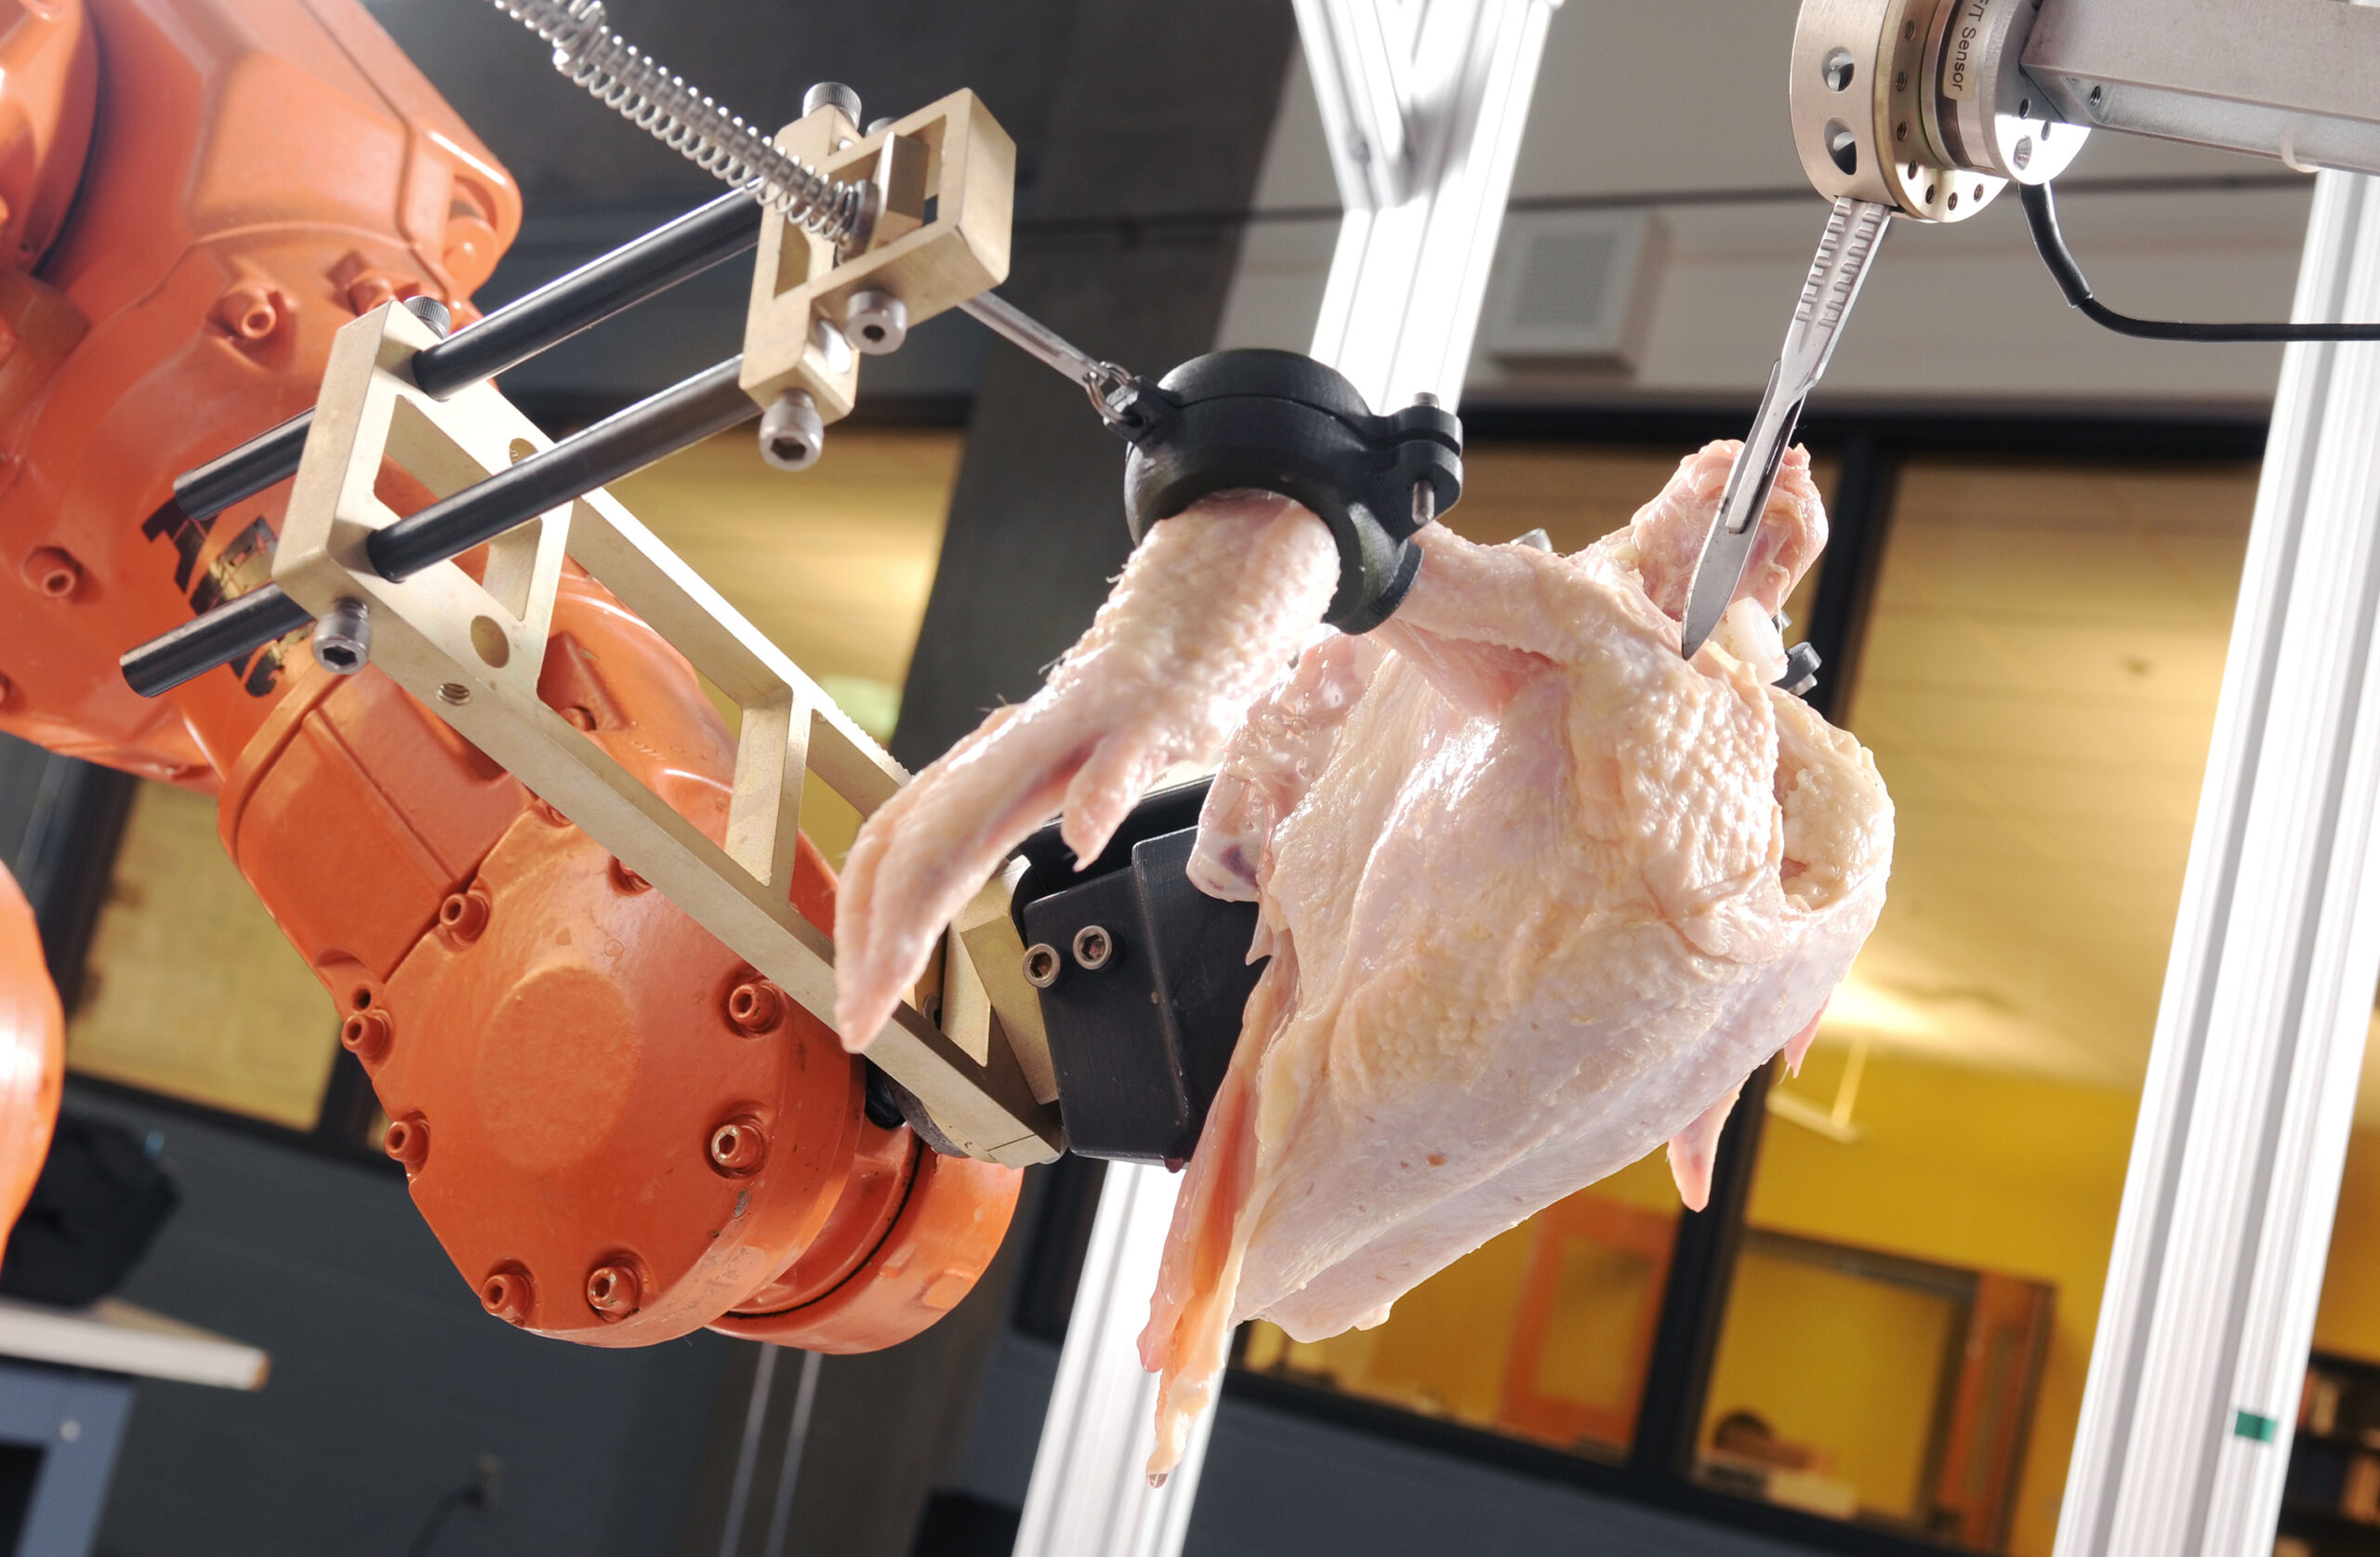 PopSci Q&A: A Robot Masters the Art of Chicken Deboning